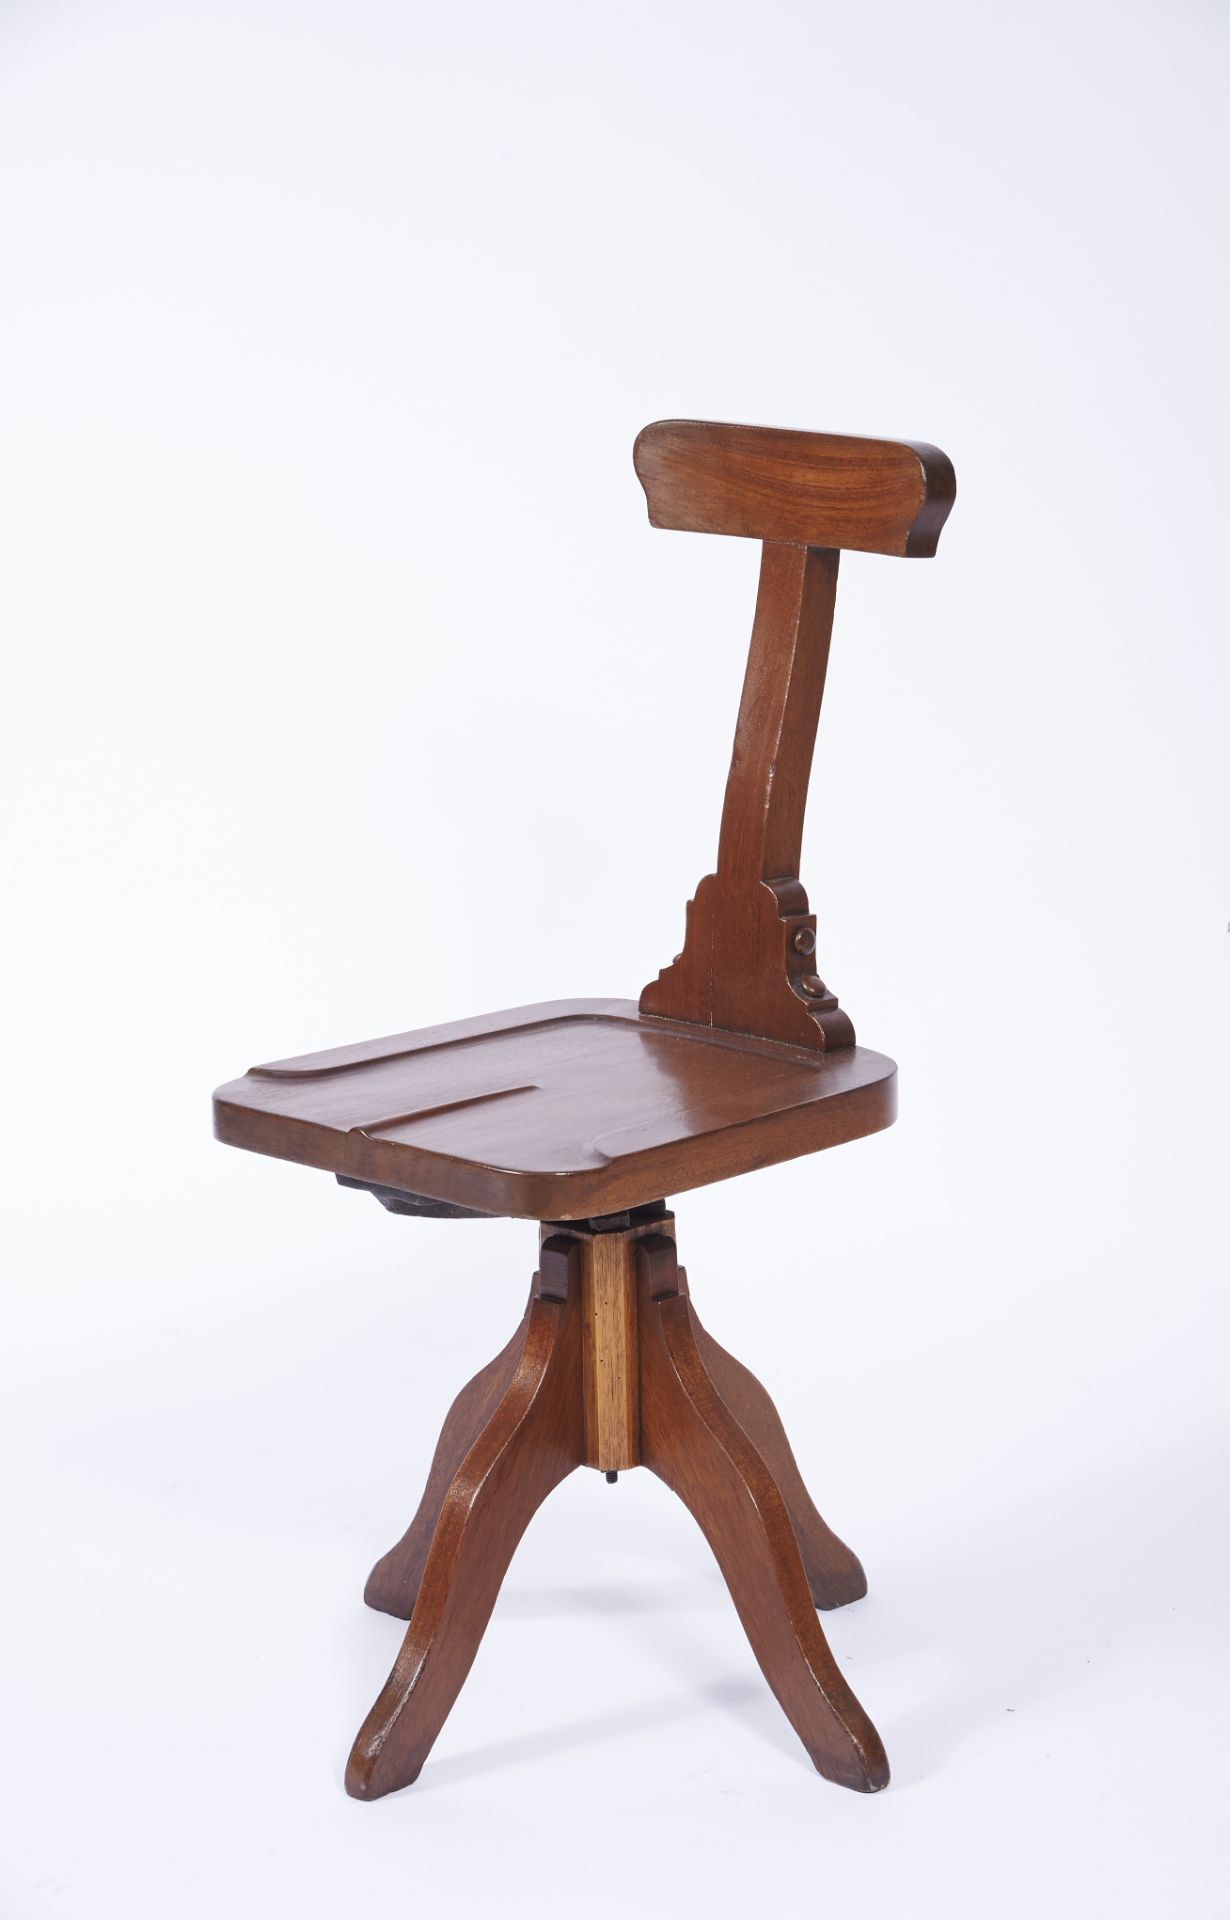 A Desk Chair mahogany swivel seat Portuguese 20th C. (the 40s/50s) signs of use traces of wood